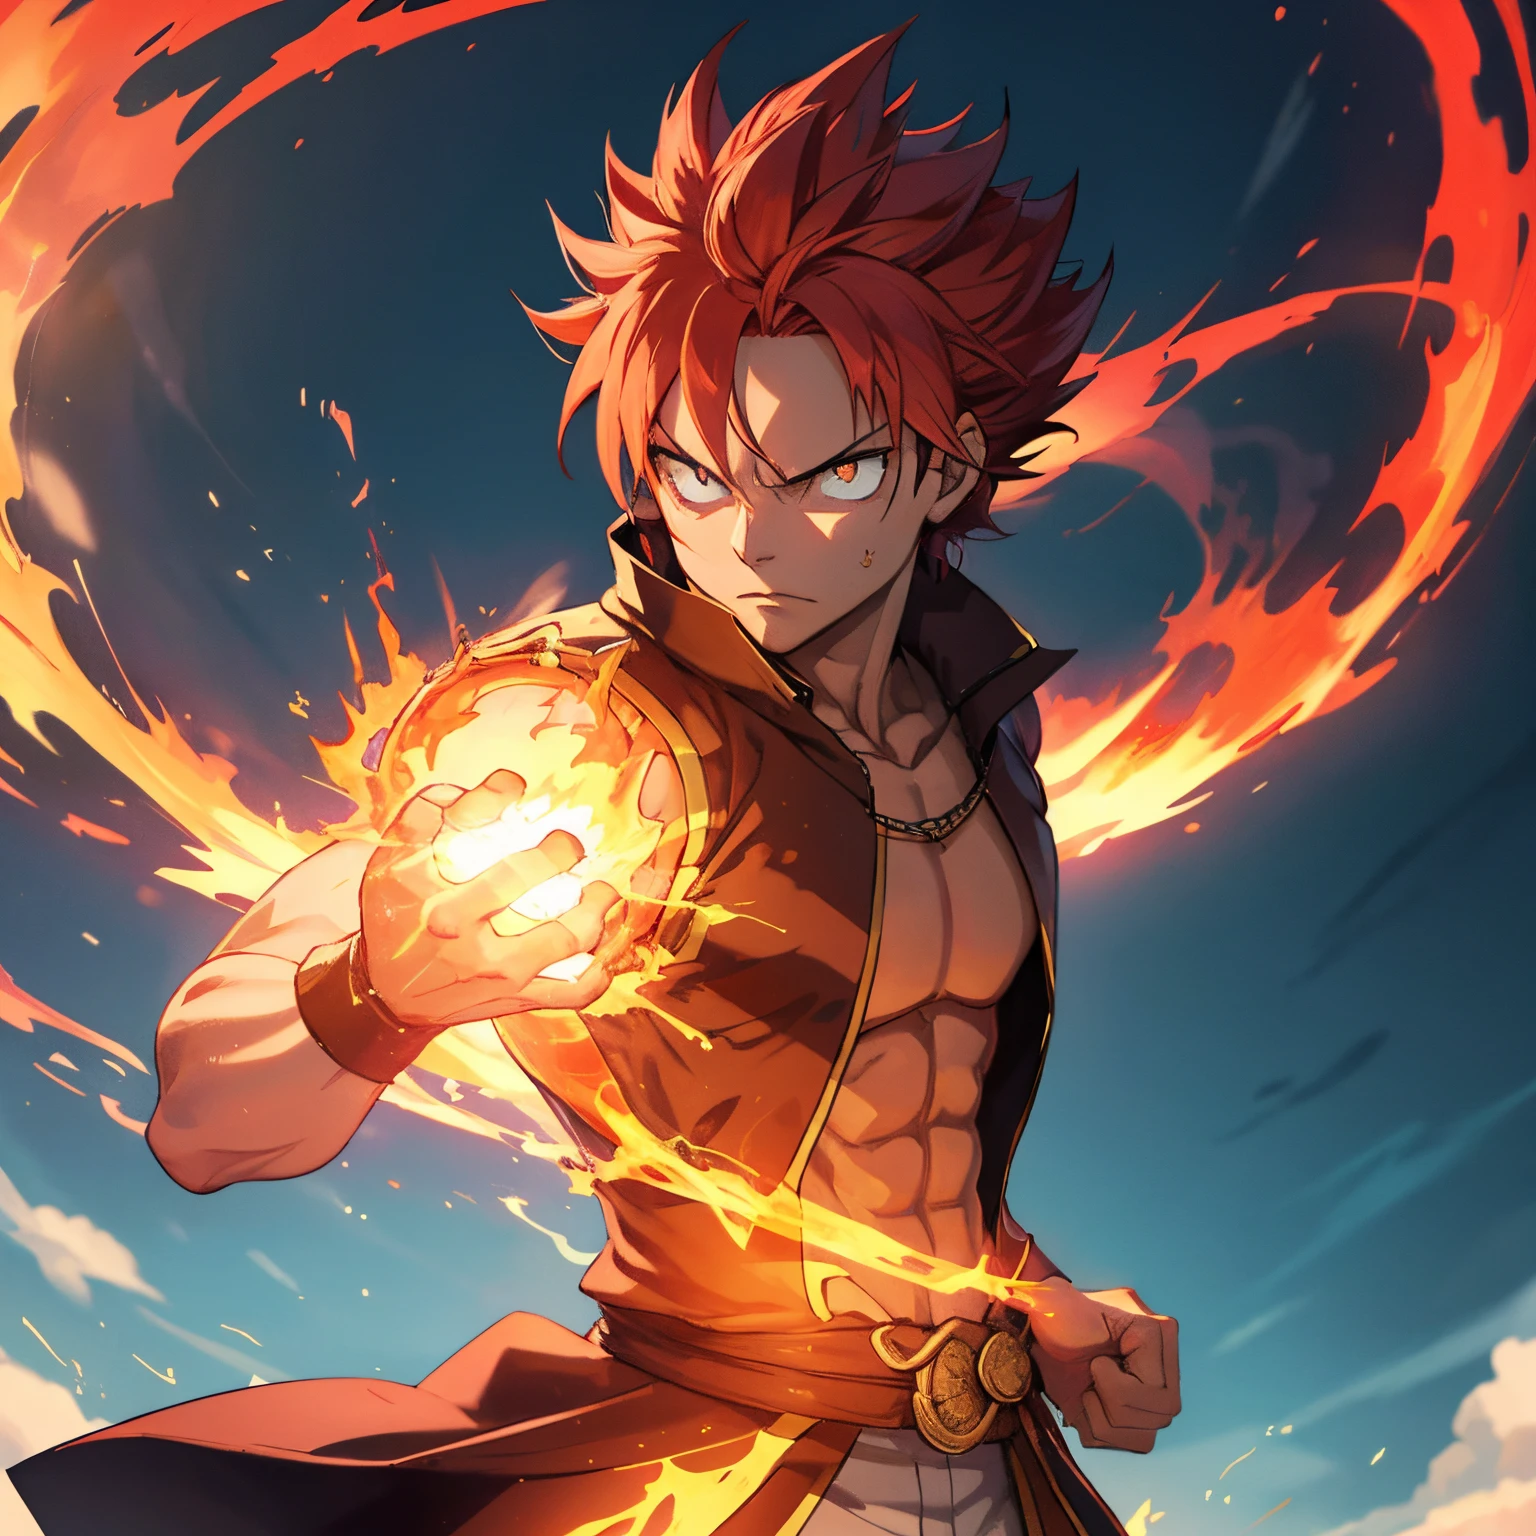 best qualityer,ultra detali,portraite,painting-like,magic of fire,red hair,dramatic lighting,flames,fierce expression,smoking hot,anime styling,vivid colors,fiery background,scorched earth,spiky hair,Dragon Slayer,echarpe,wild attitude,fire ball,Force,confidence,fiery eyes,intense aura,zoomed-in shot,action pose,Muscular Physique,Fantasy world,flaming fists,fighting spirit,unlimited power increase,majestic,roaring flames,fiery battle,Energetic,smitten,adventurous,heroic,Ambitious,Unwavering determination,Unstoppable,immense heat,raging hell,noble purpose